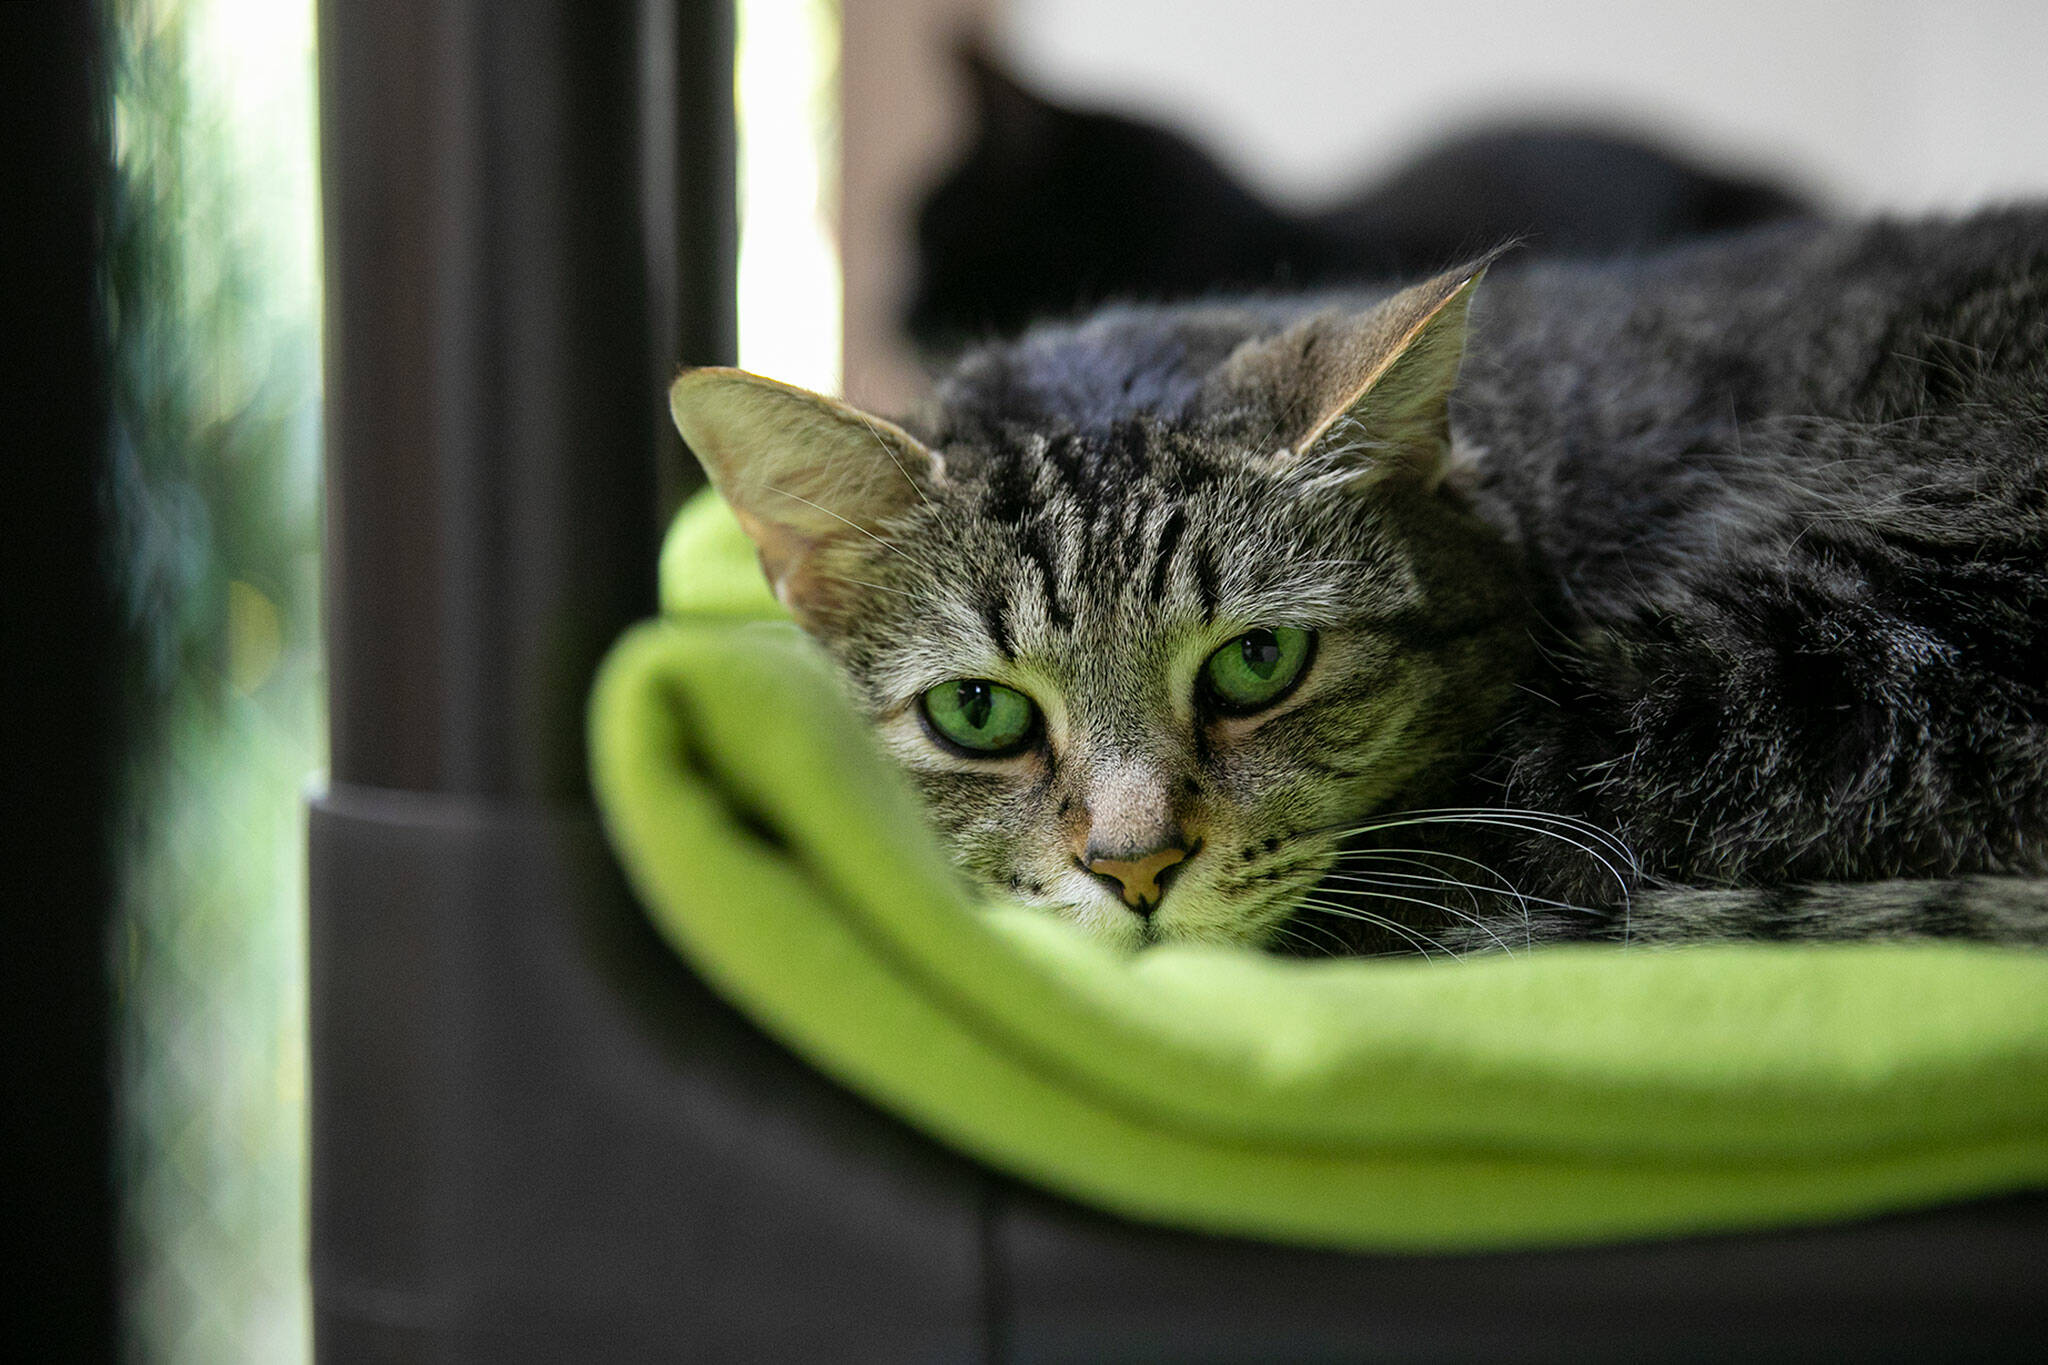 A cat in the adoption room tries to get comfortable for a nap despite having visitors July 20 at Purrfect Pals Cat Sanctuary near Arlington. (Ryan Berry / The Herald)